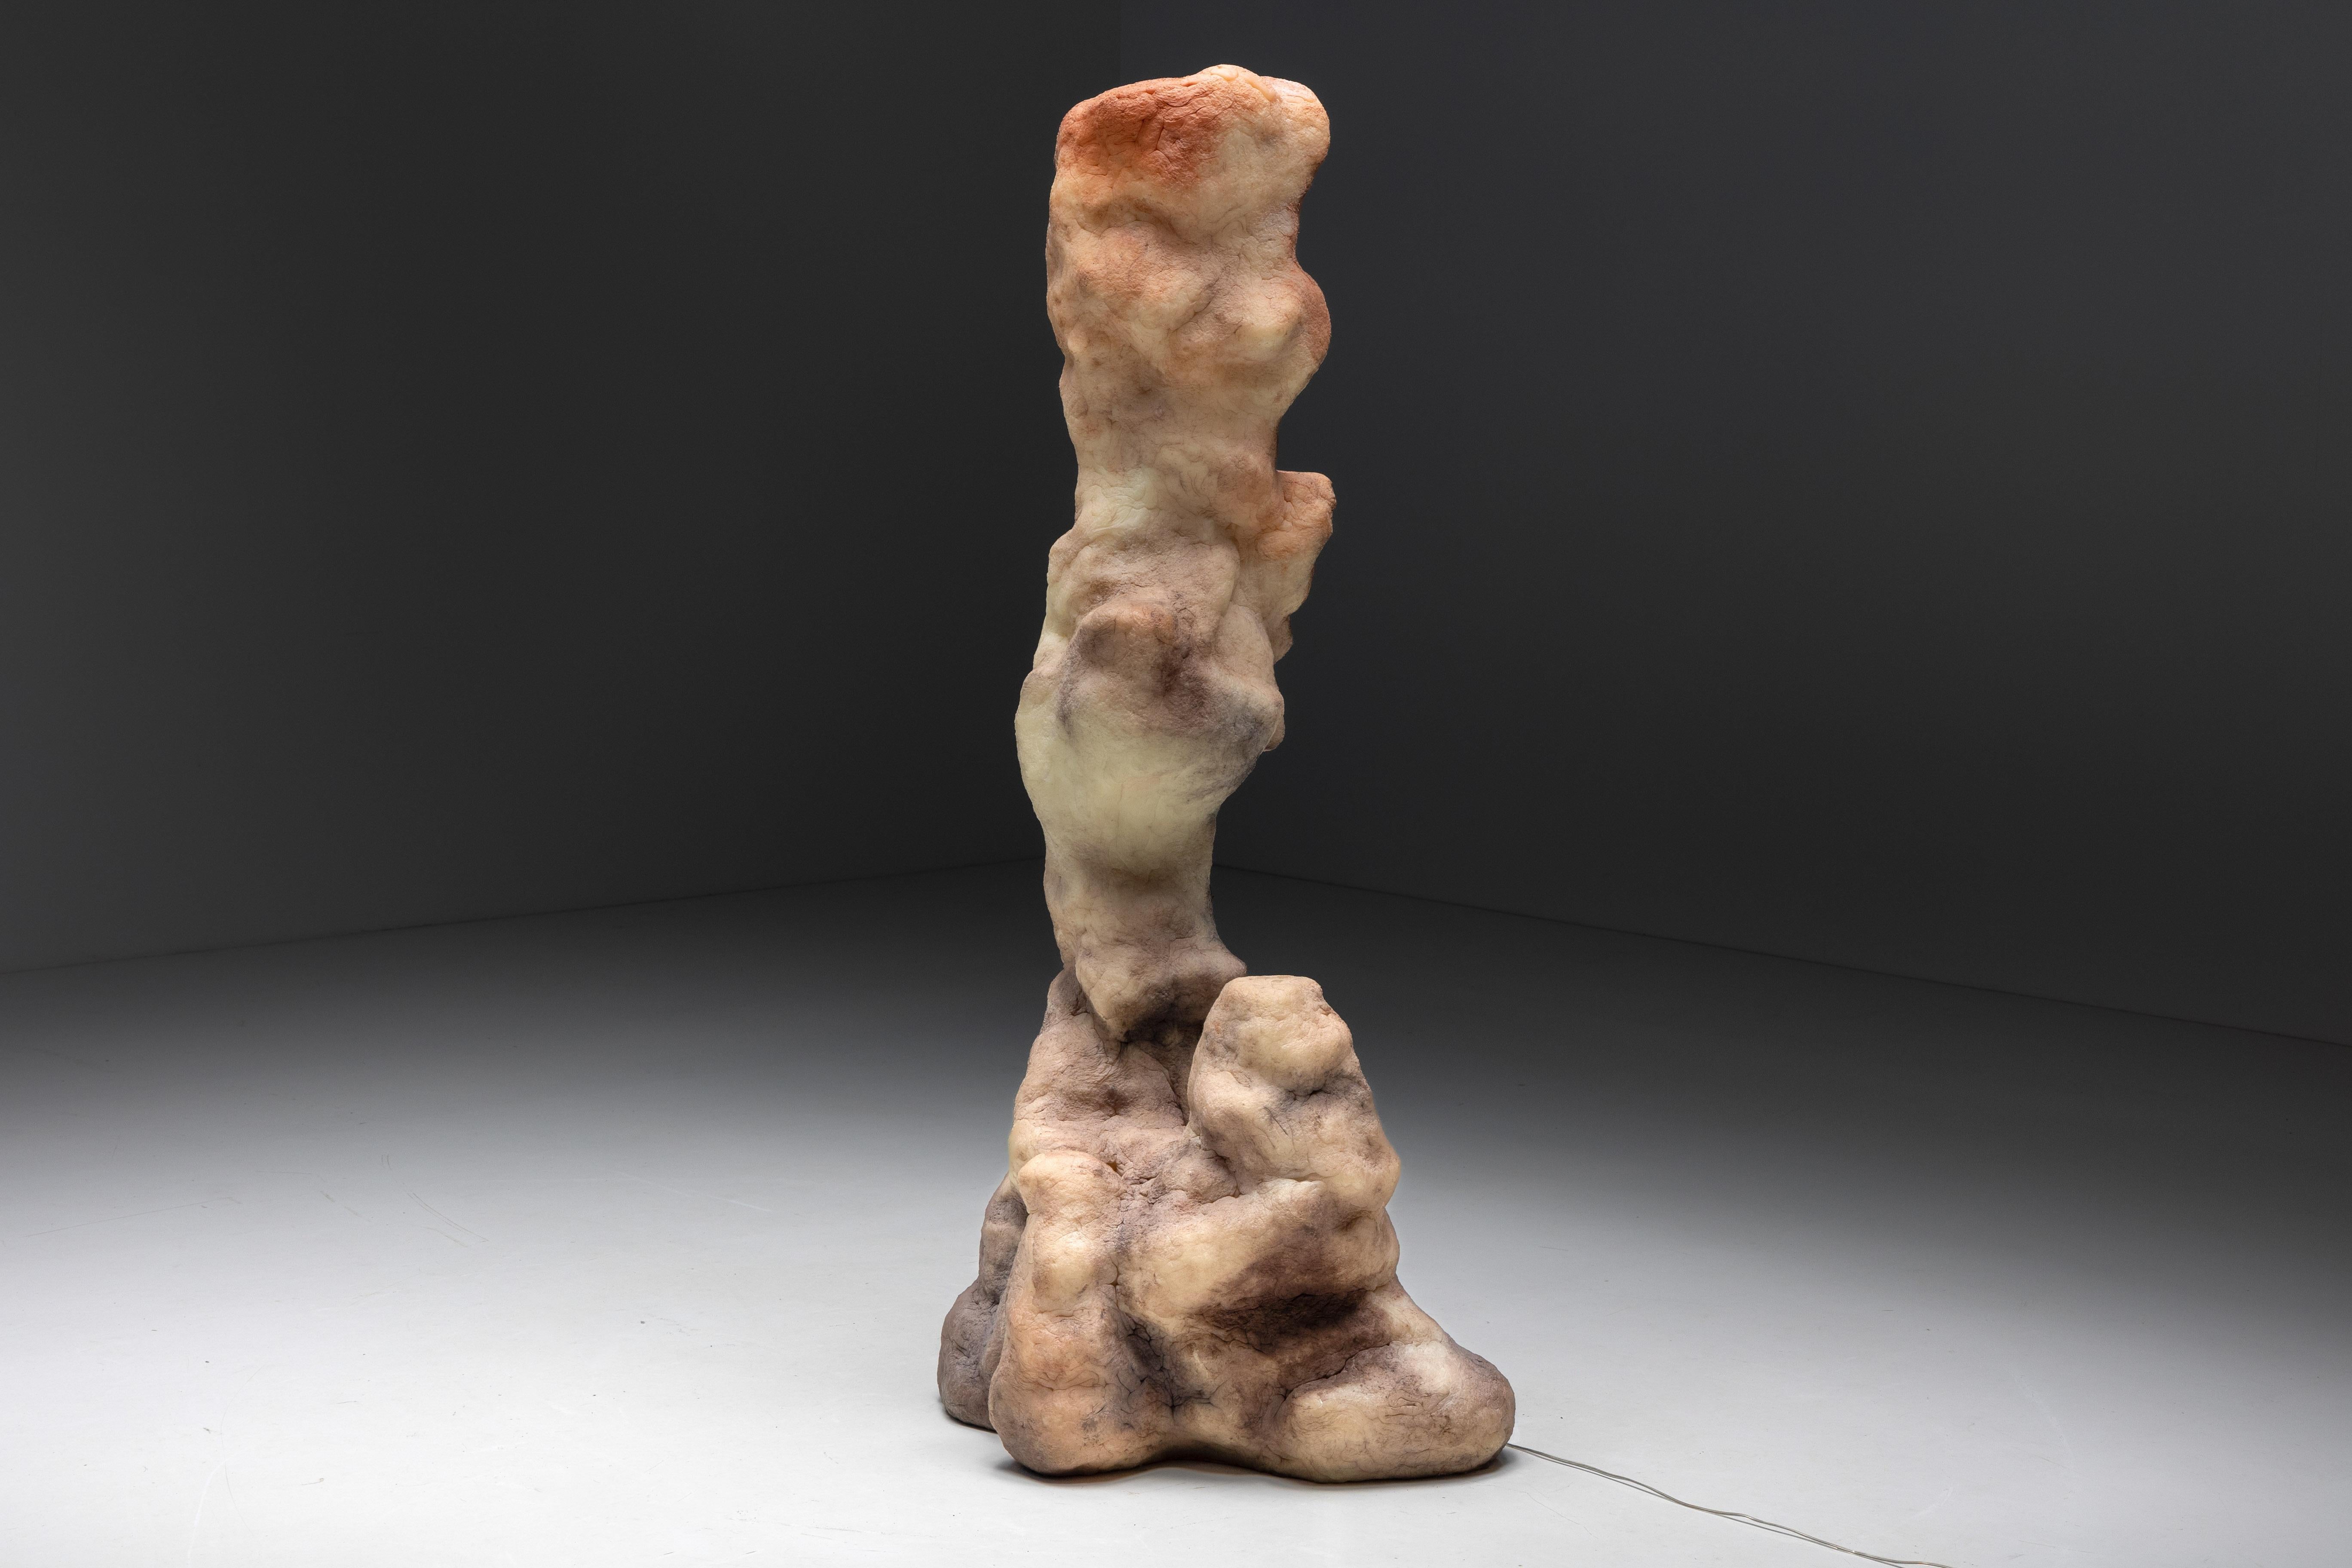 Elissa Lacoste's 'I Dream of Megalithic Times' series: Tufa Lamp, 2019. Composed of various speleothem-like shapes emerging from silicone skins infused with earthly pigments. This collection of functional art pieces challenges conventional notions